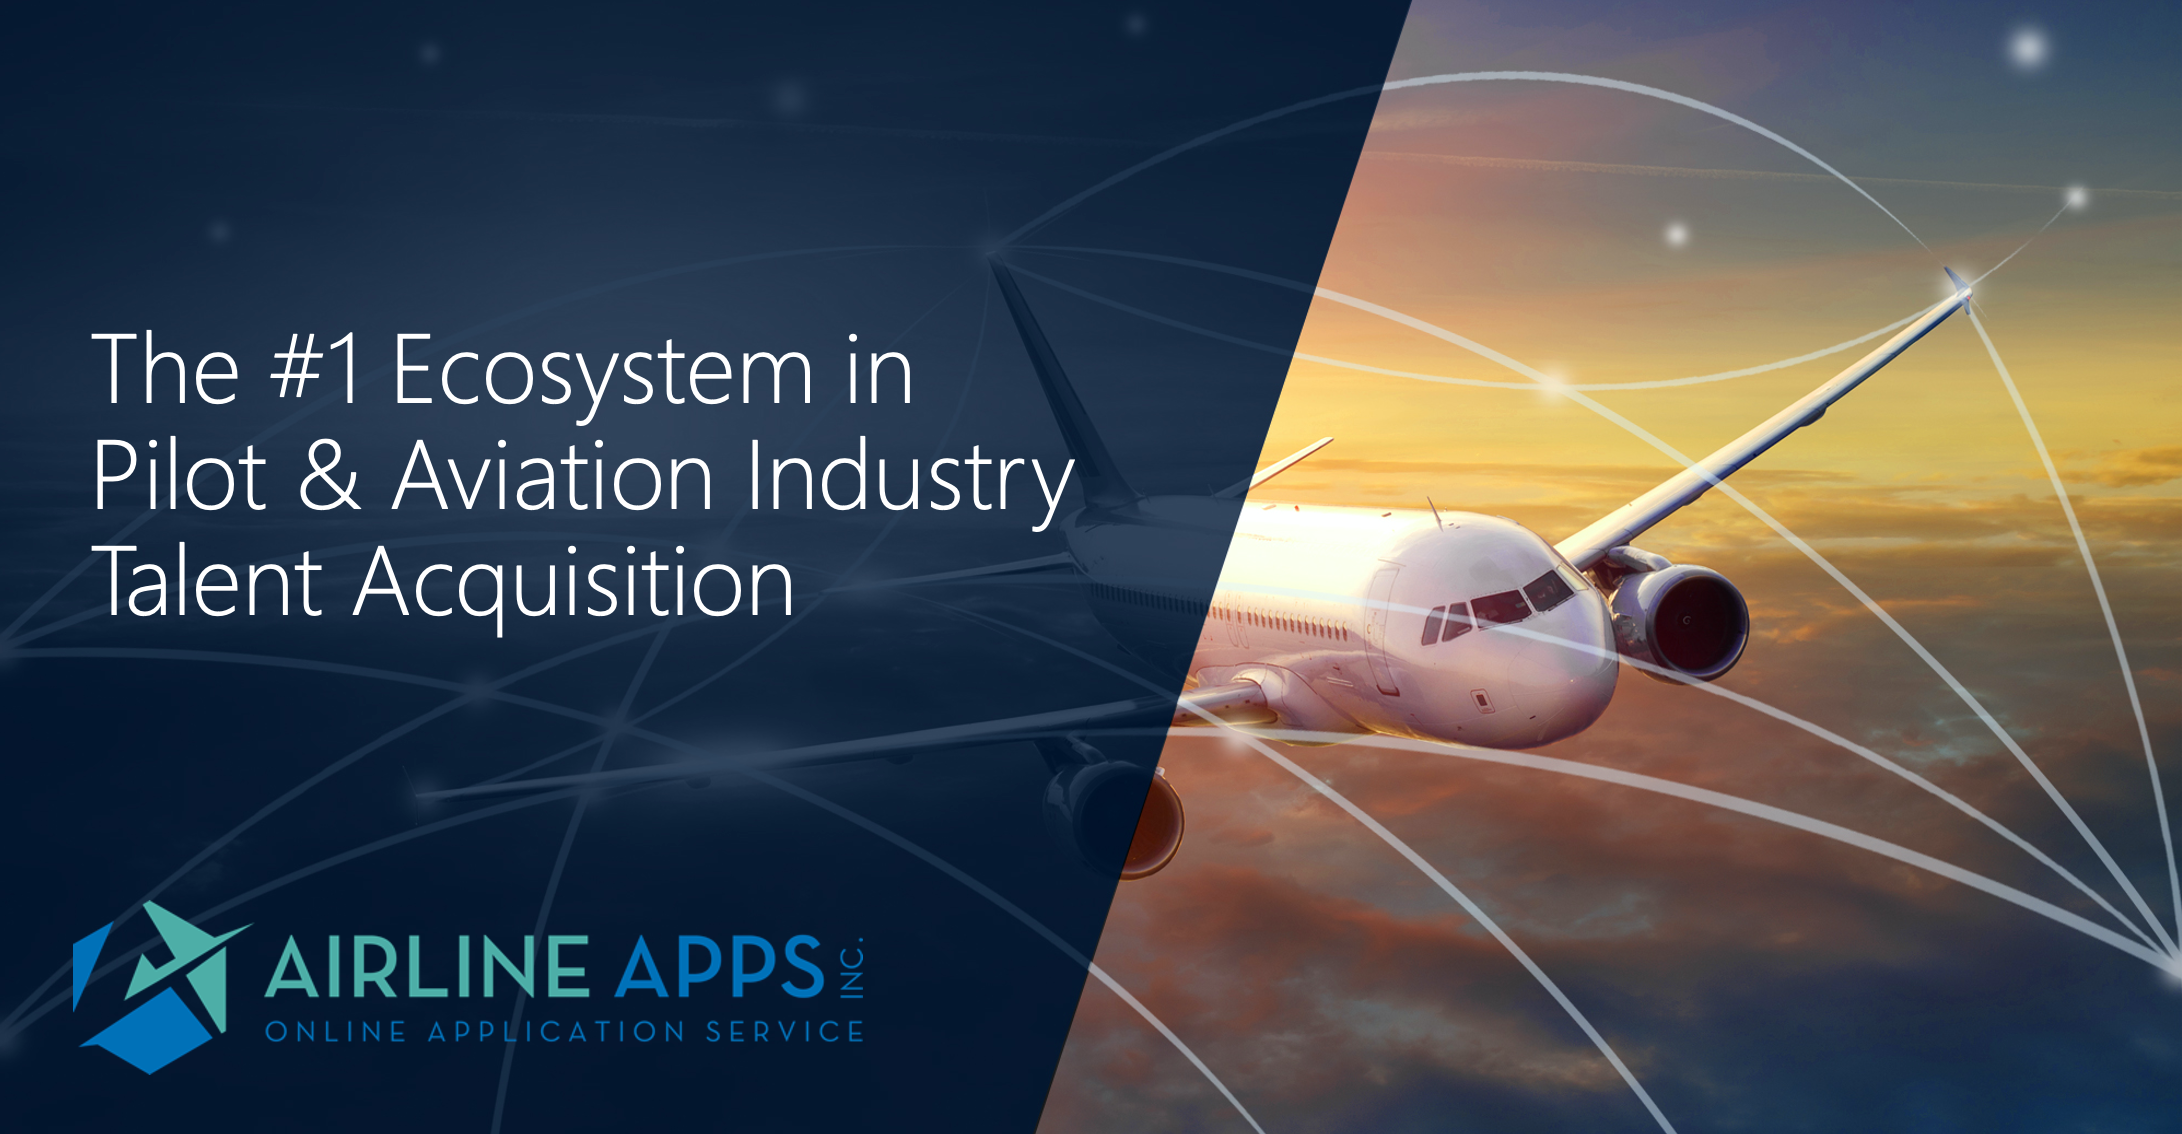 Airline Apps - The #1 Ecosystem in the Pilot & Aviation Industry Talent Acquisition